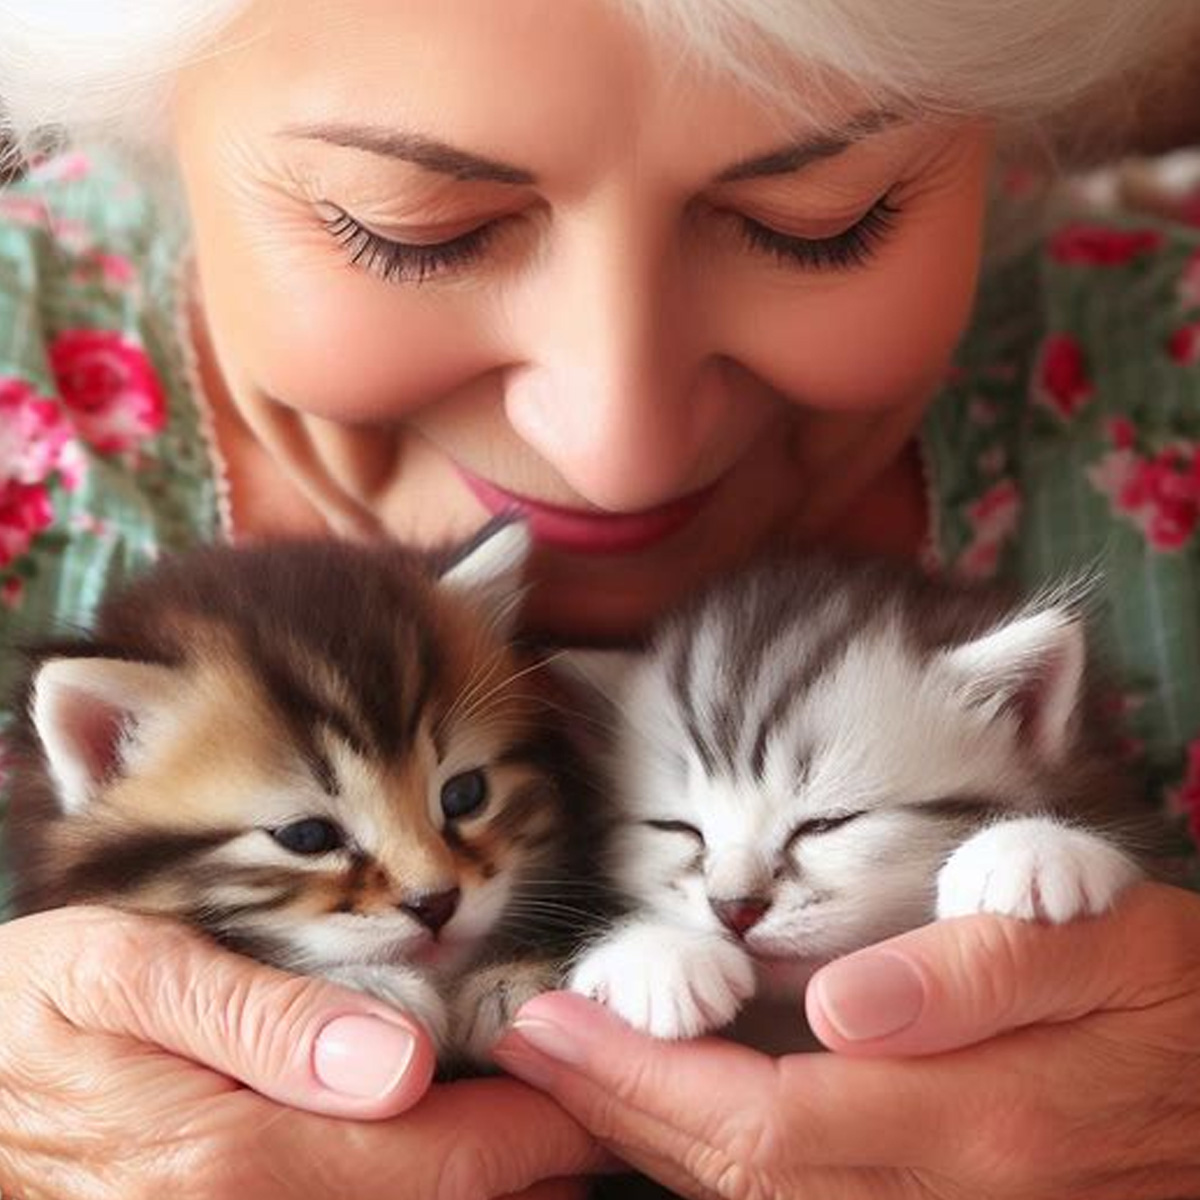 A Match Made in Heaven: Grandma and Rescue Kittens Share a Moment of Pure Love